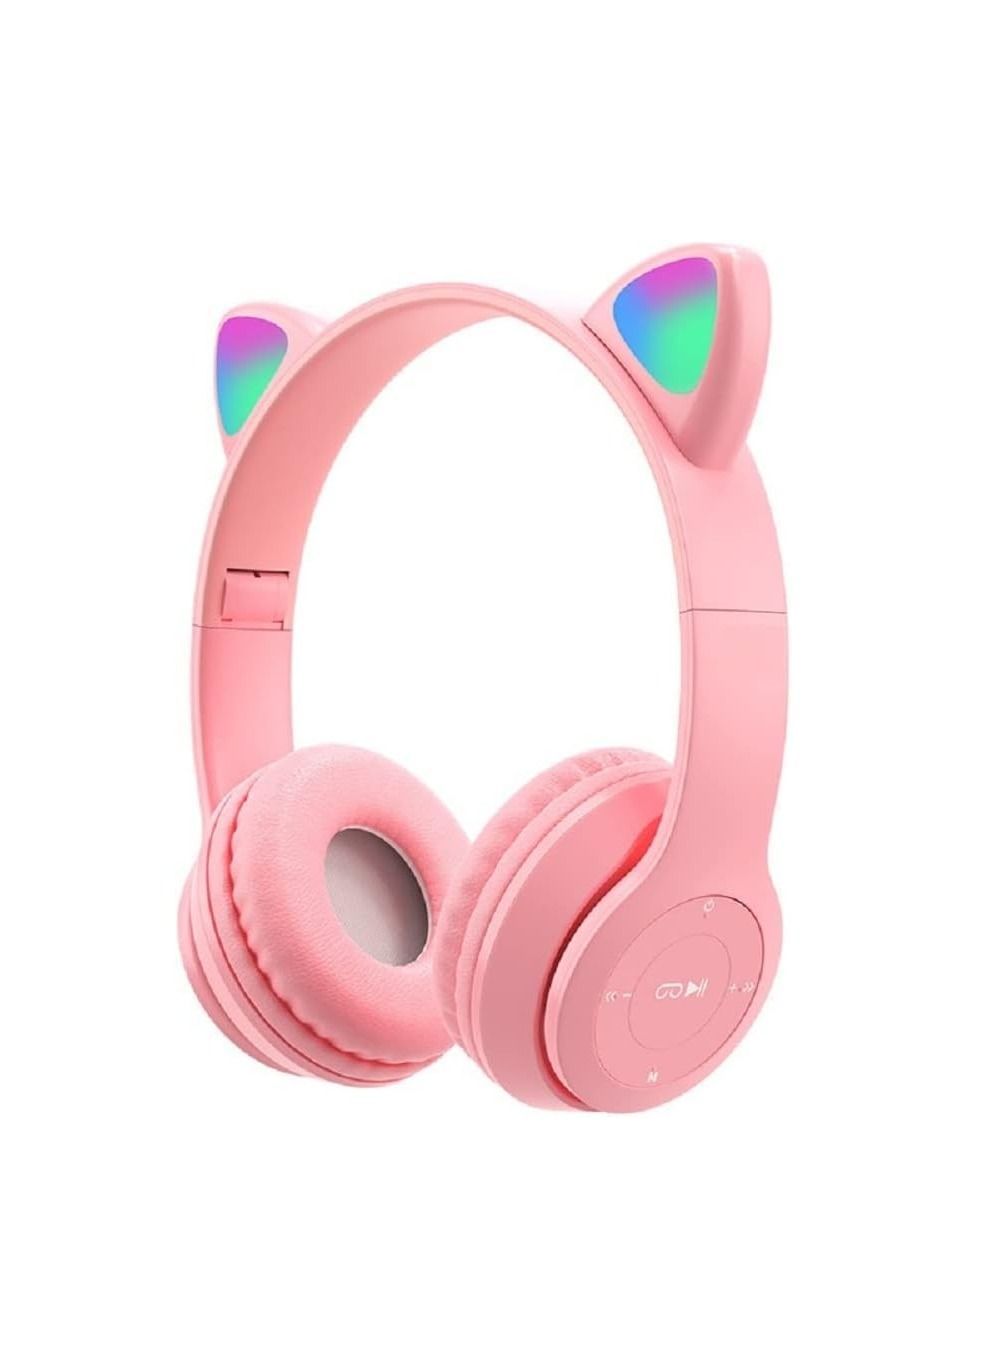 Cat wired and Wireless Over Ear Headphones, Pink - P47M